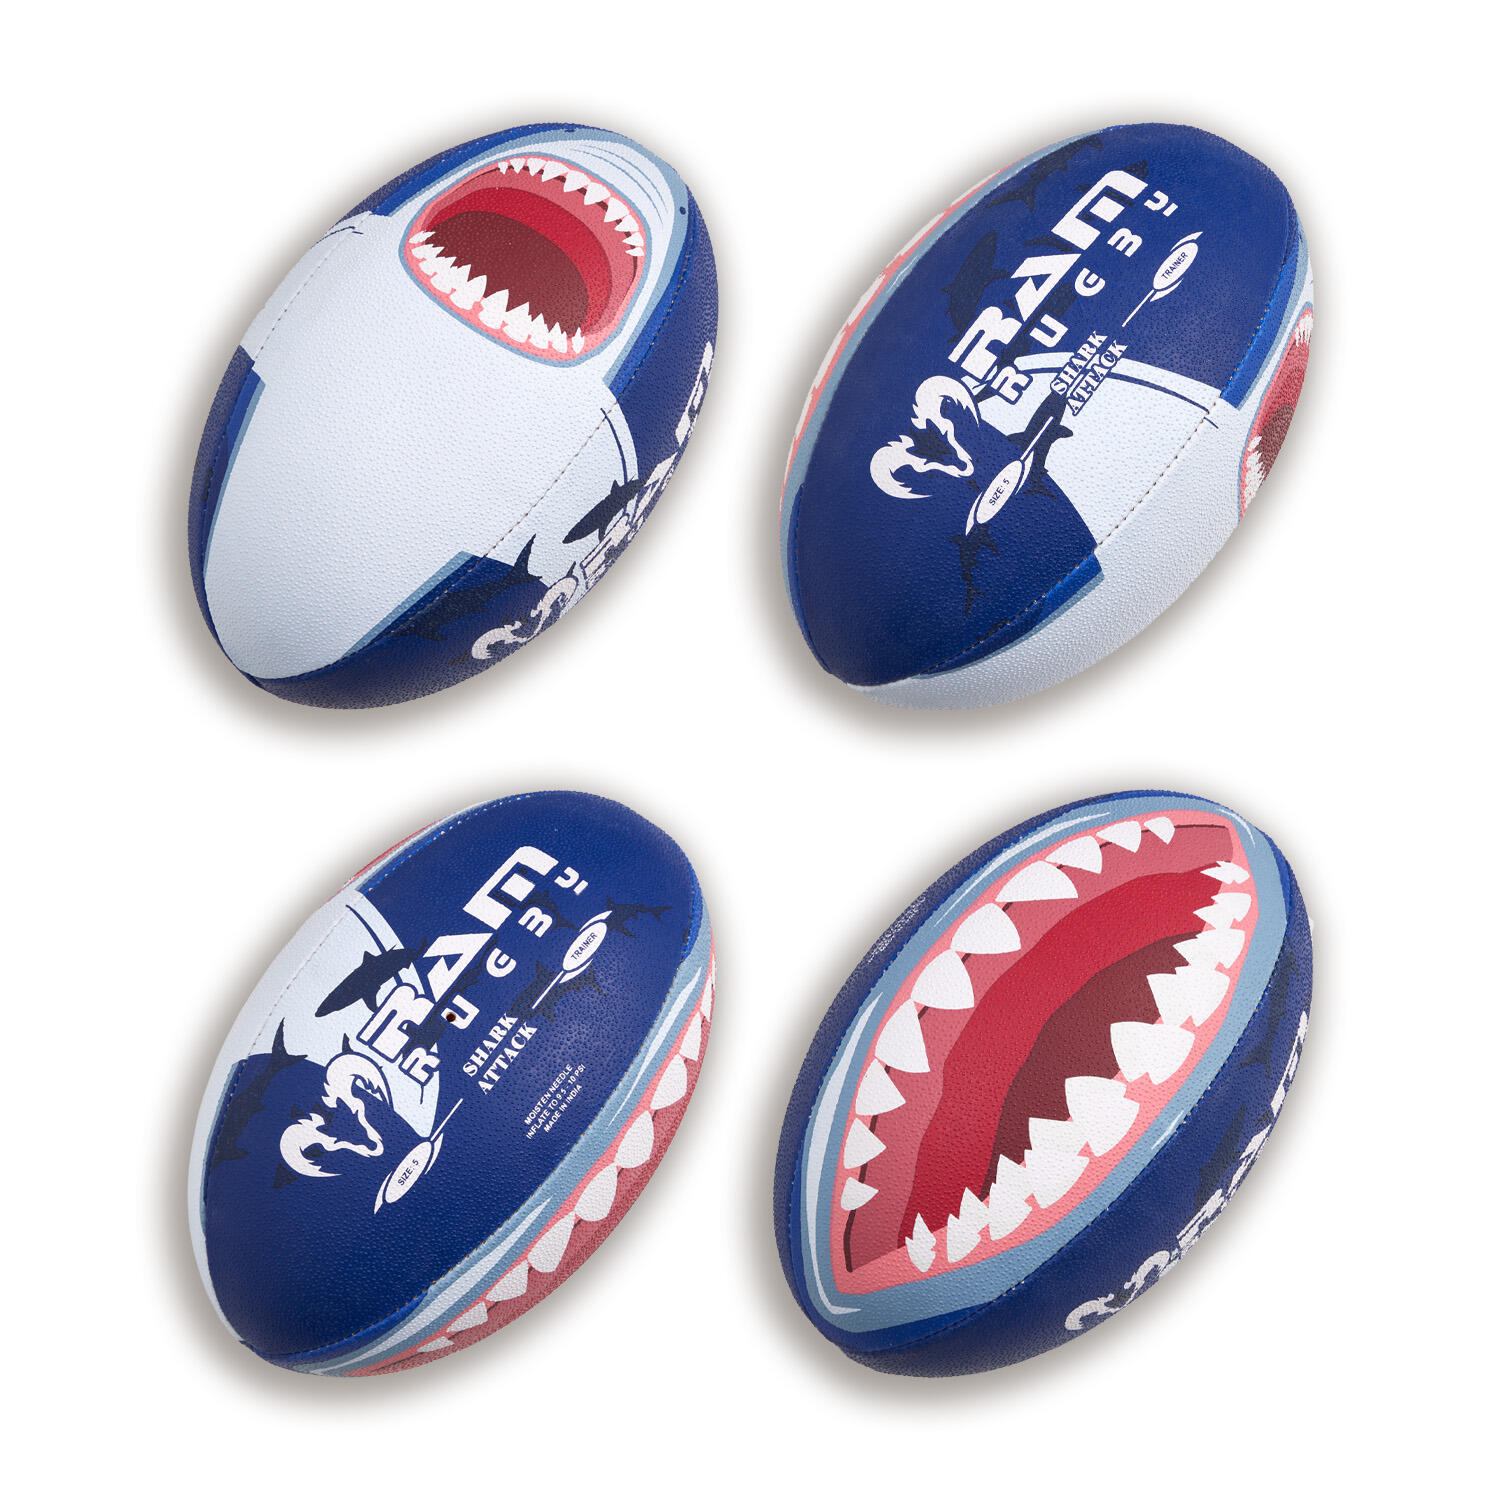 Ram Rugby Ball - Squad - Trainer - (Size Mini) - Shark Attack 2/2